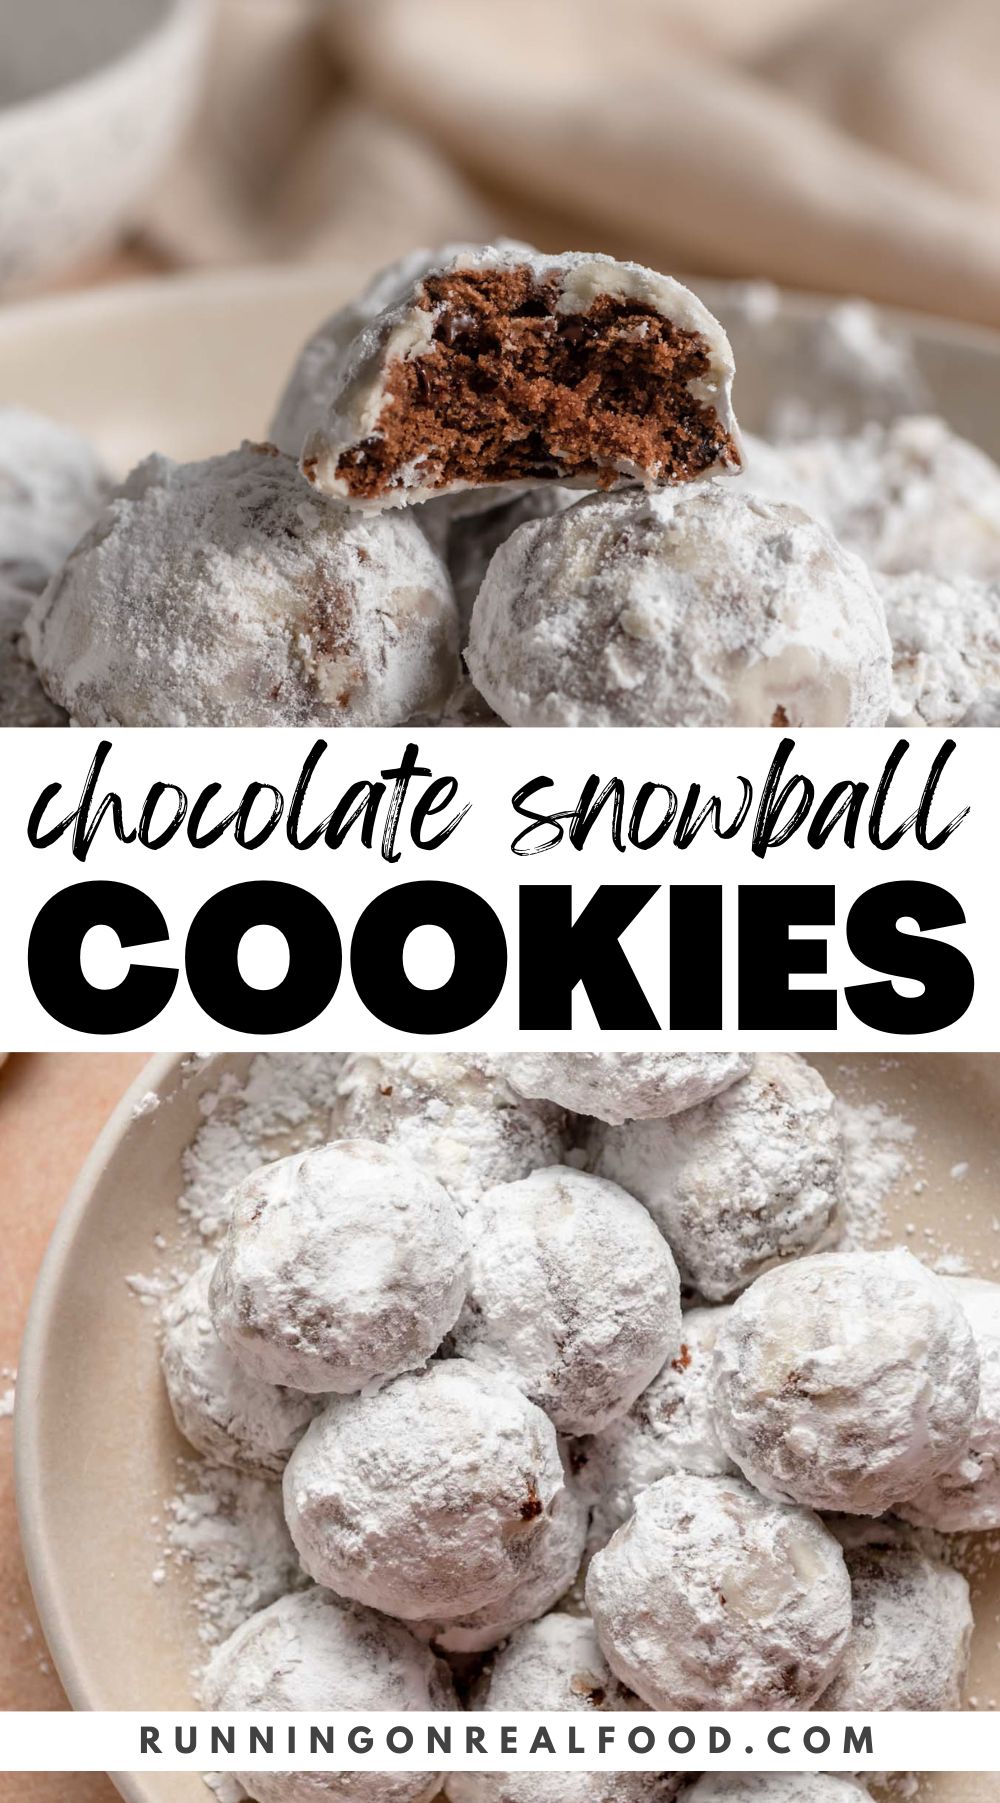 Pinterest graphic for chocolate snowball cookies with two images of the cookies and text overlay.